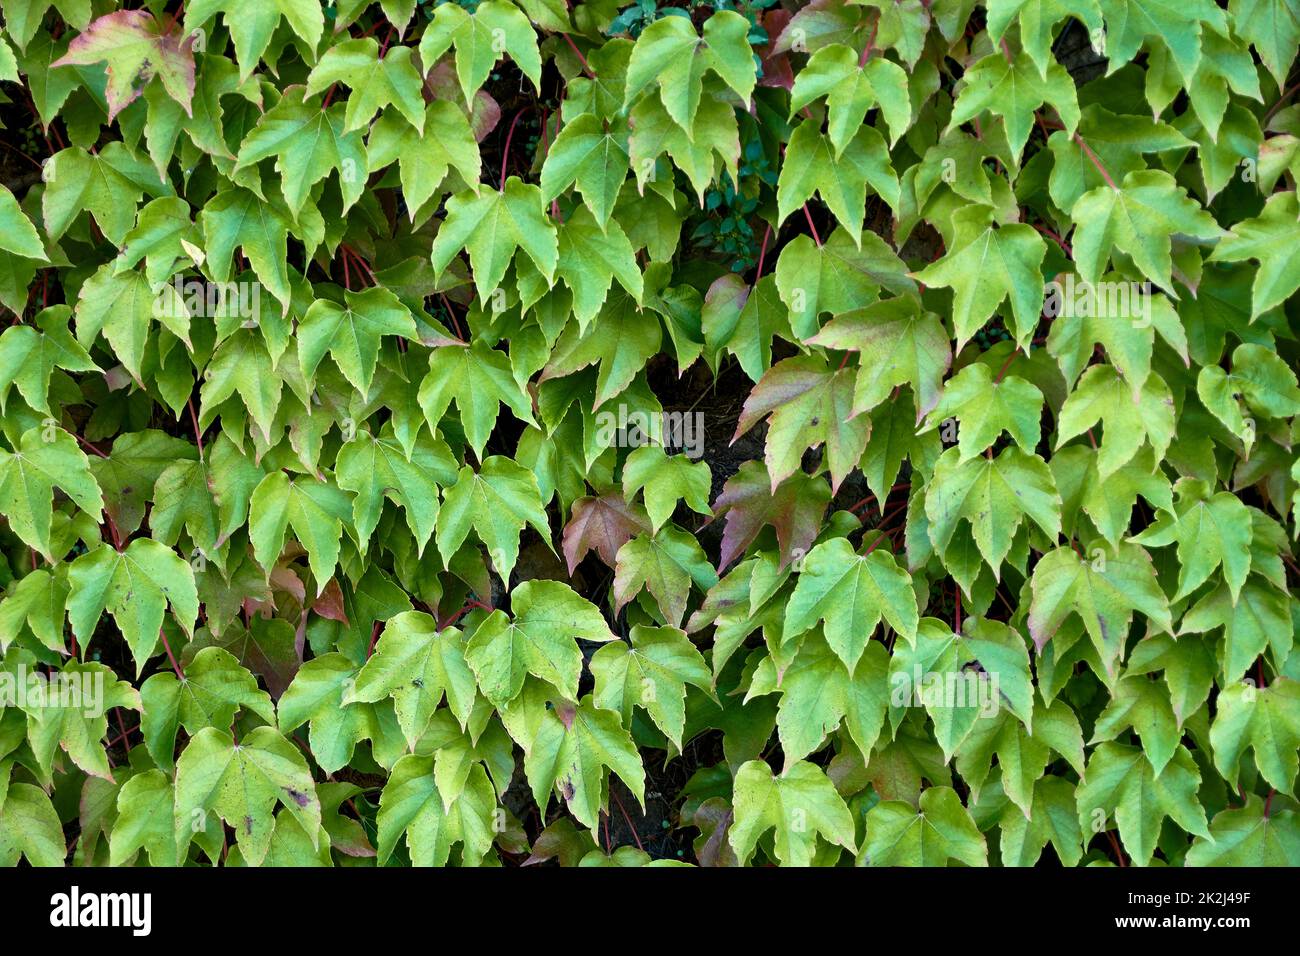 Handmade stone wall covered with ivy leaves Stock Photo